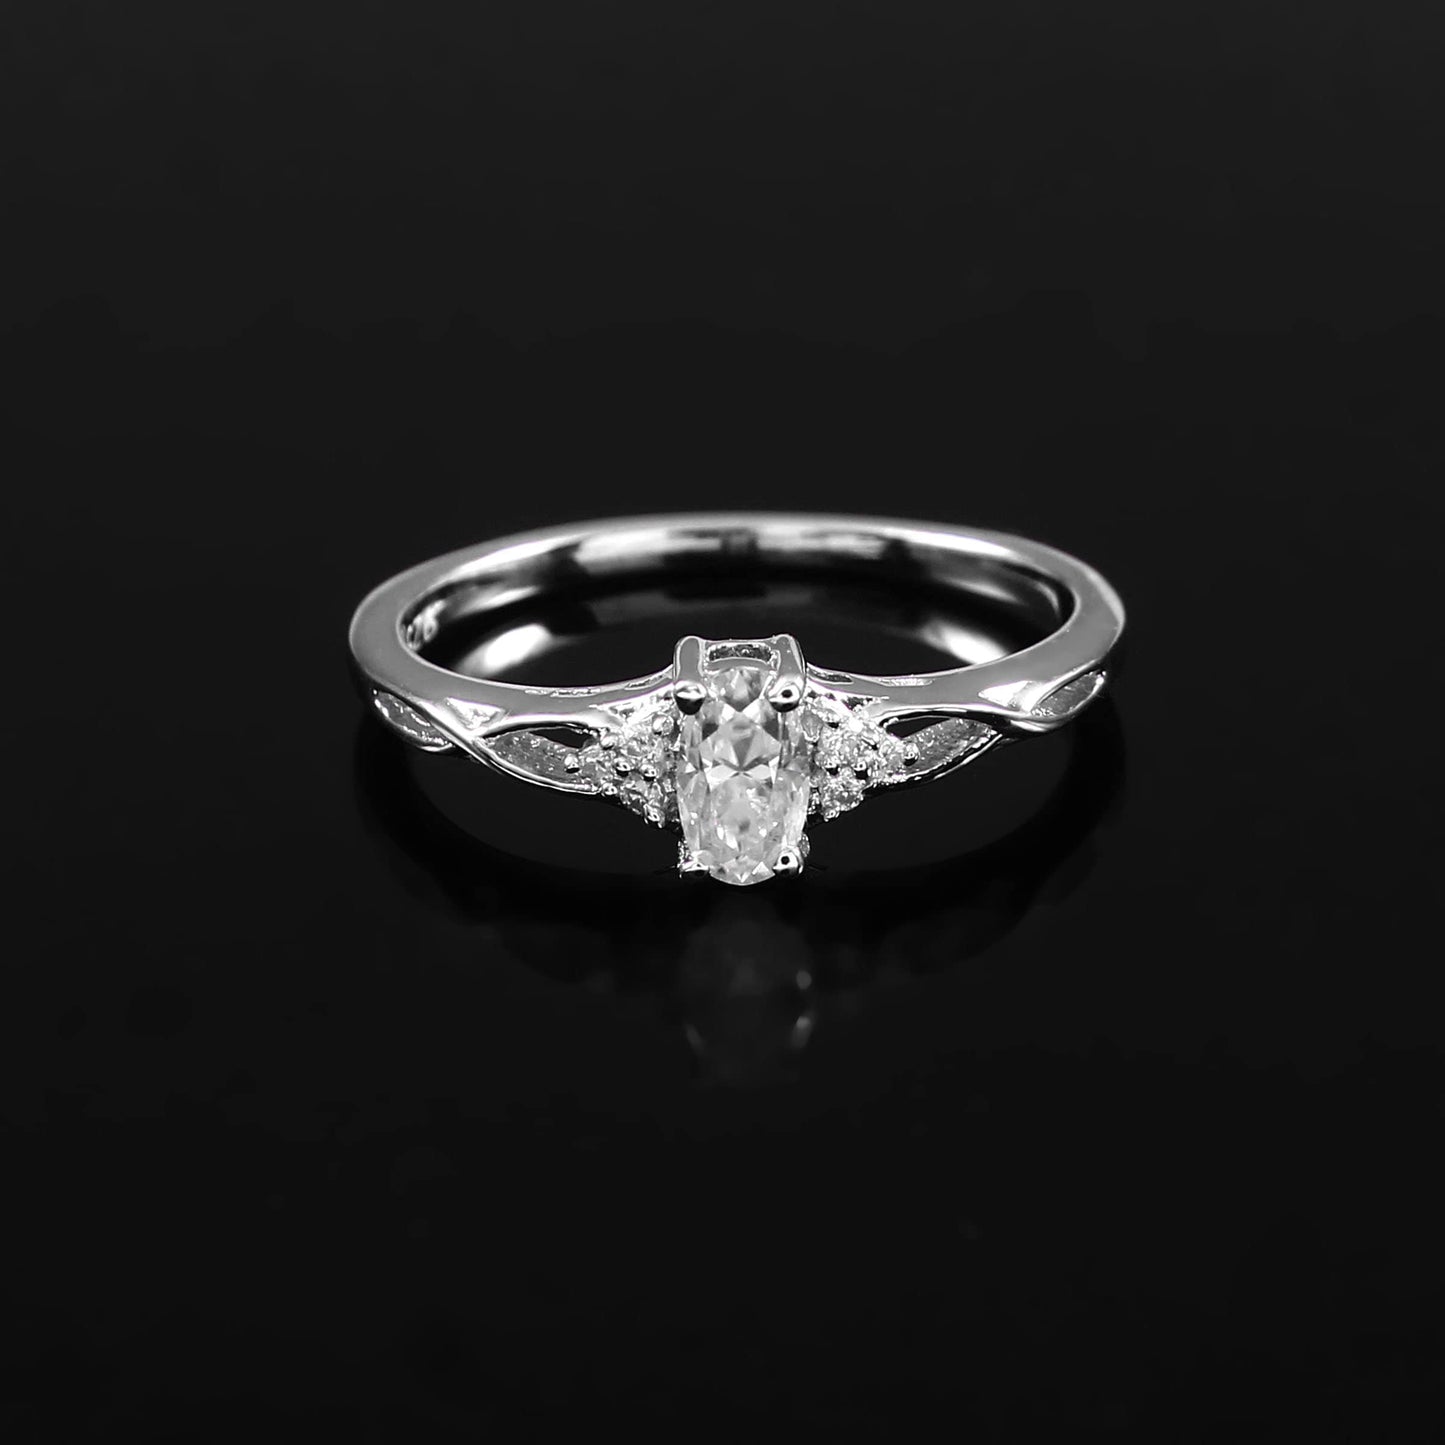 Dainty Oval Moissanite Ring set in Gold